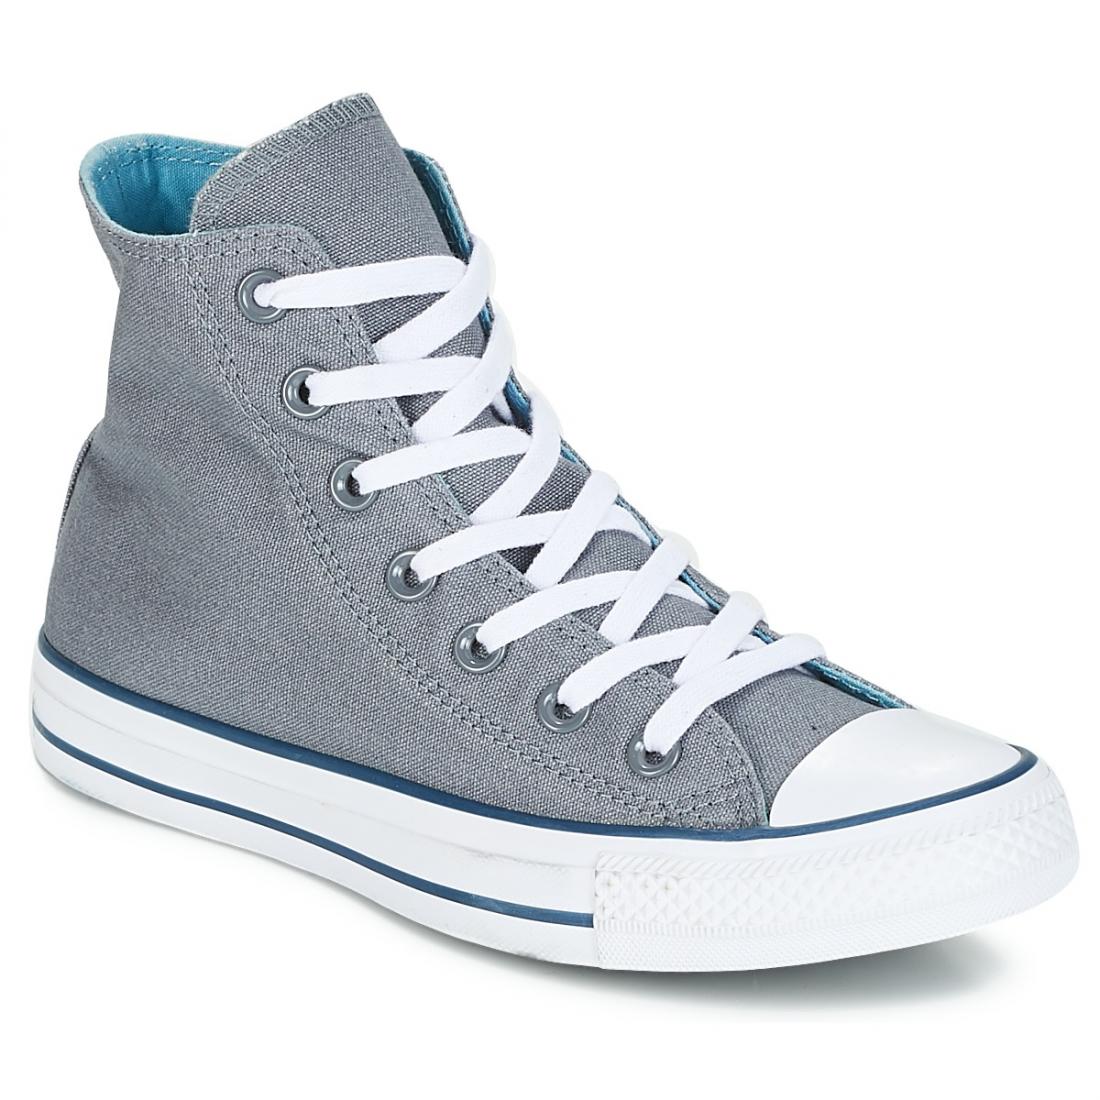 converse all star homme gris online